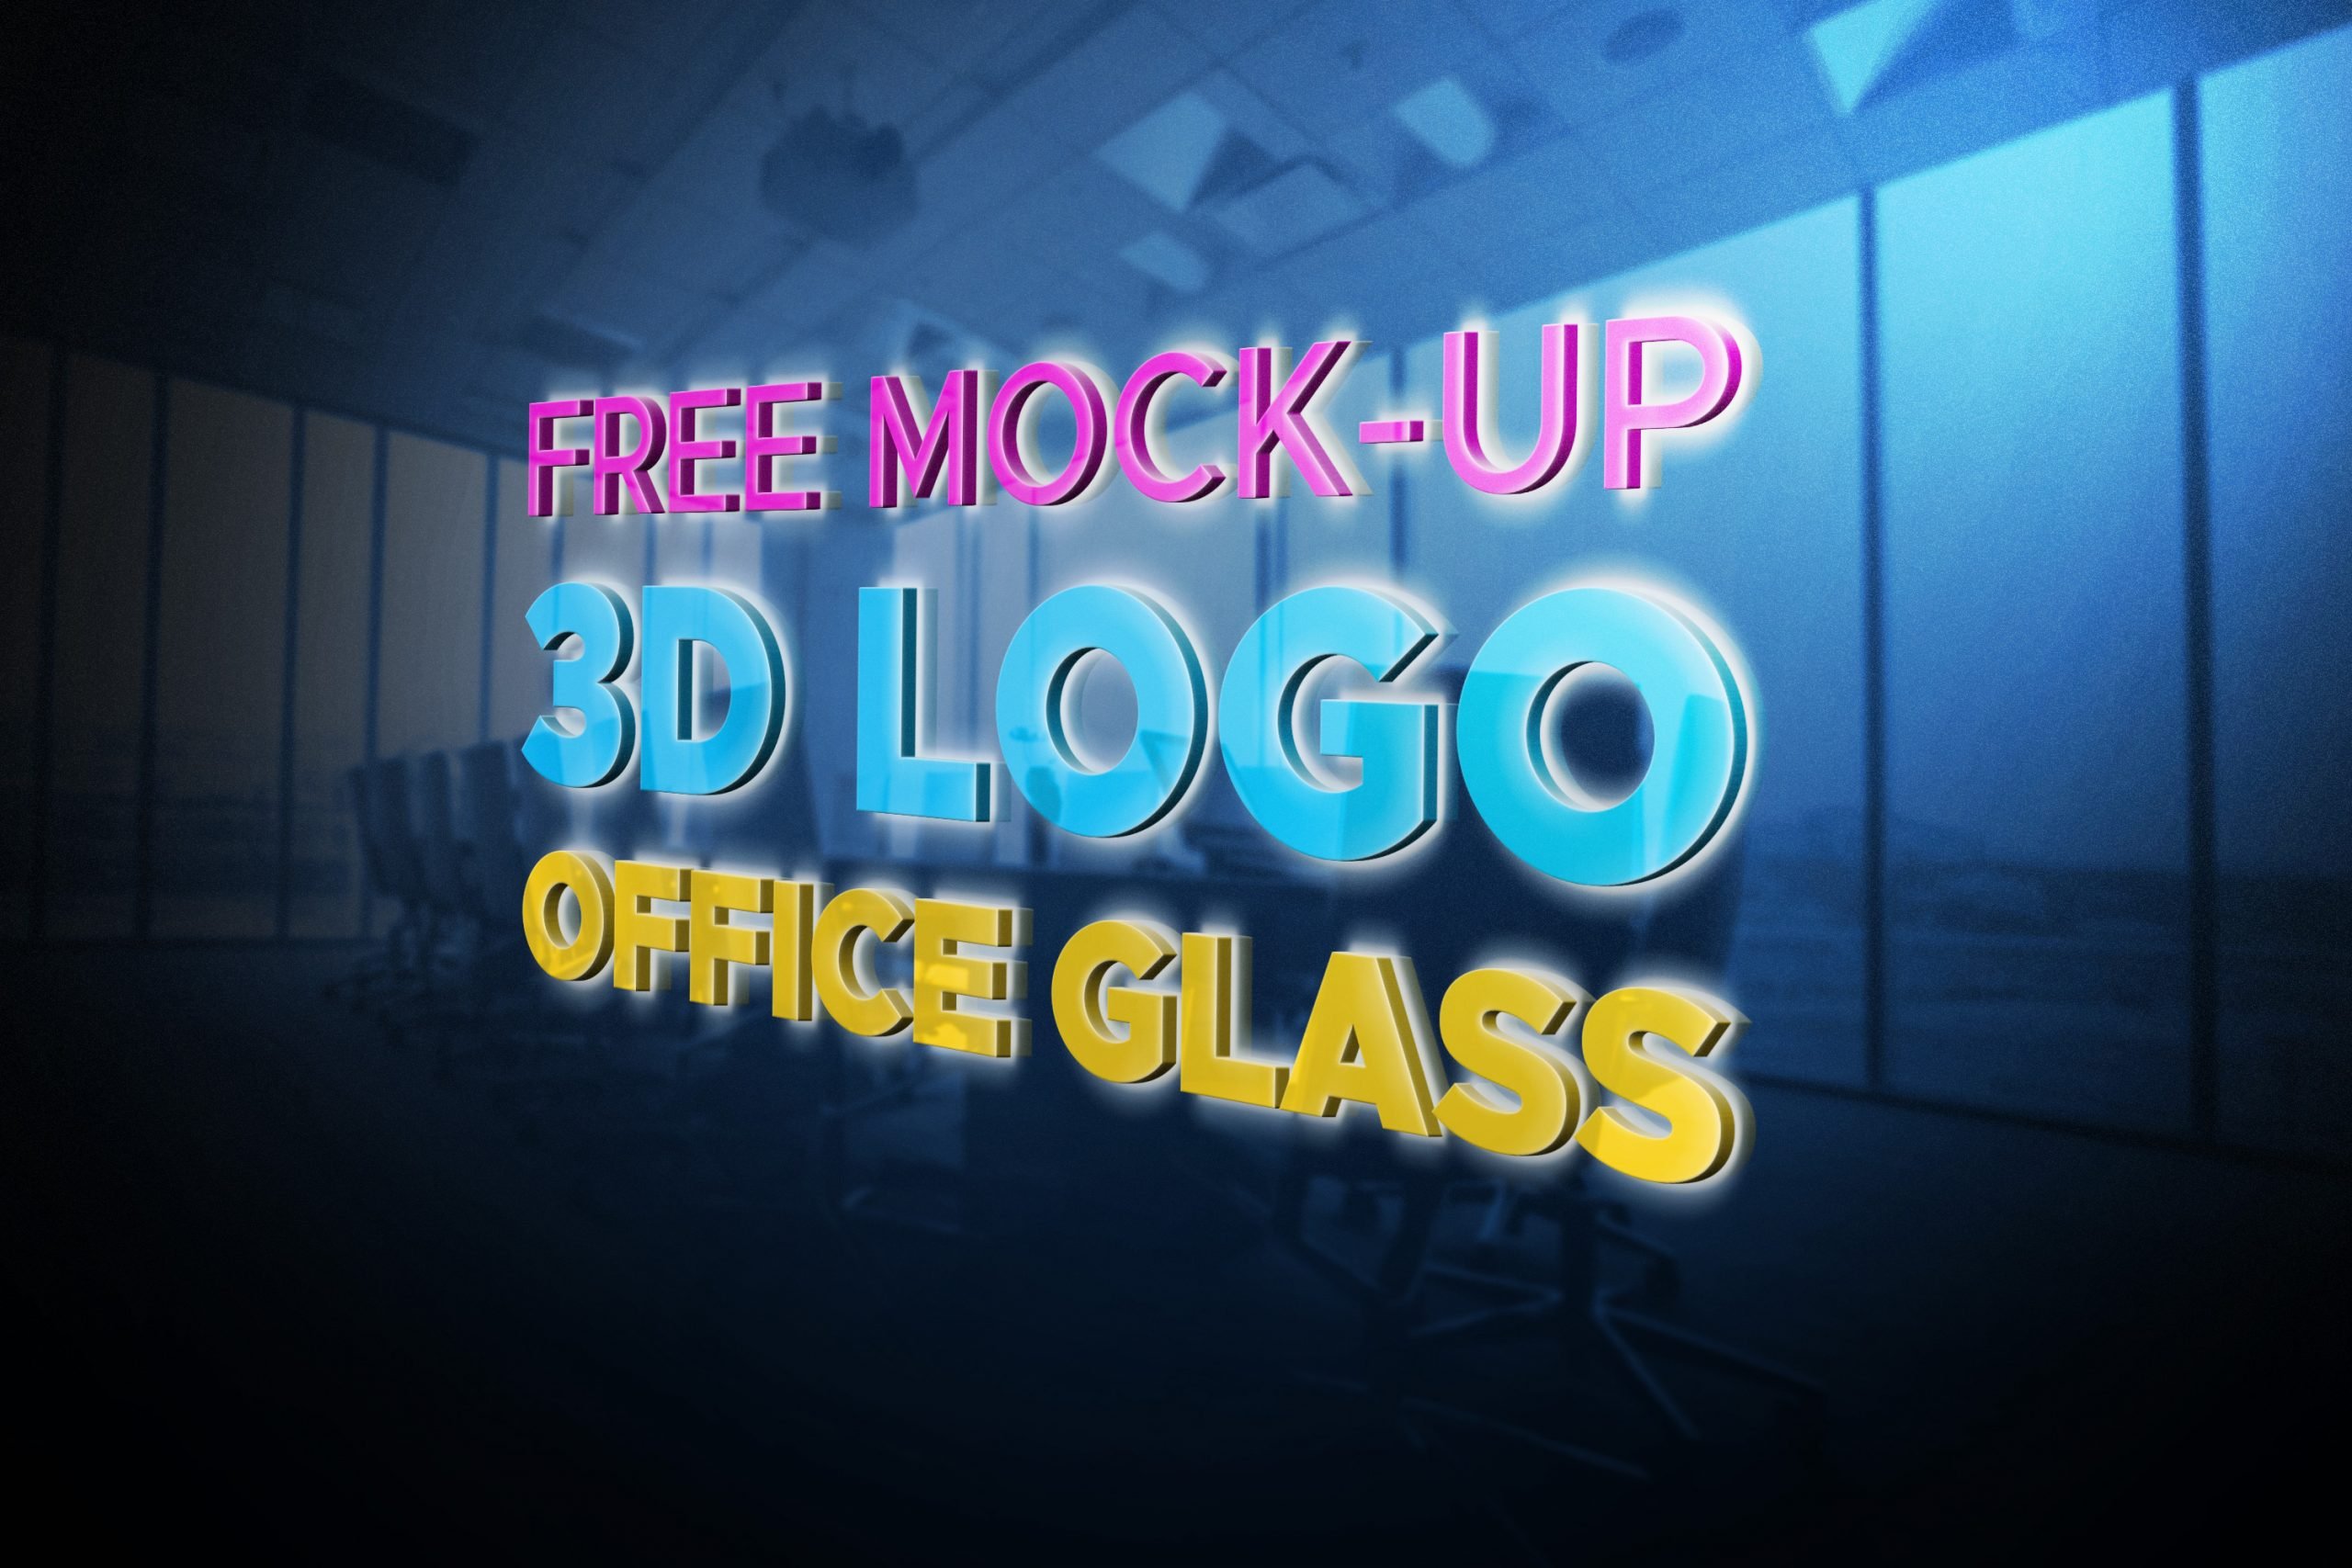 Download Free Logo Mockup Office Glass 3d Graphicsfamily